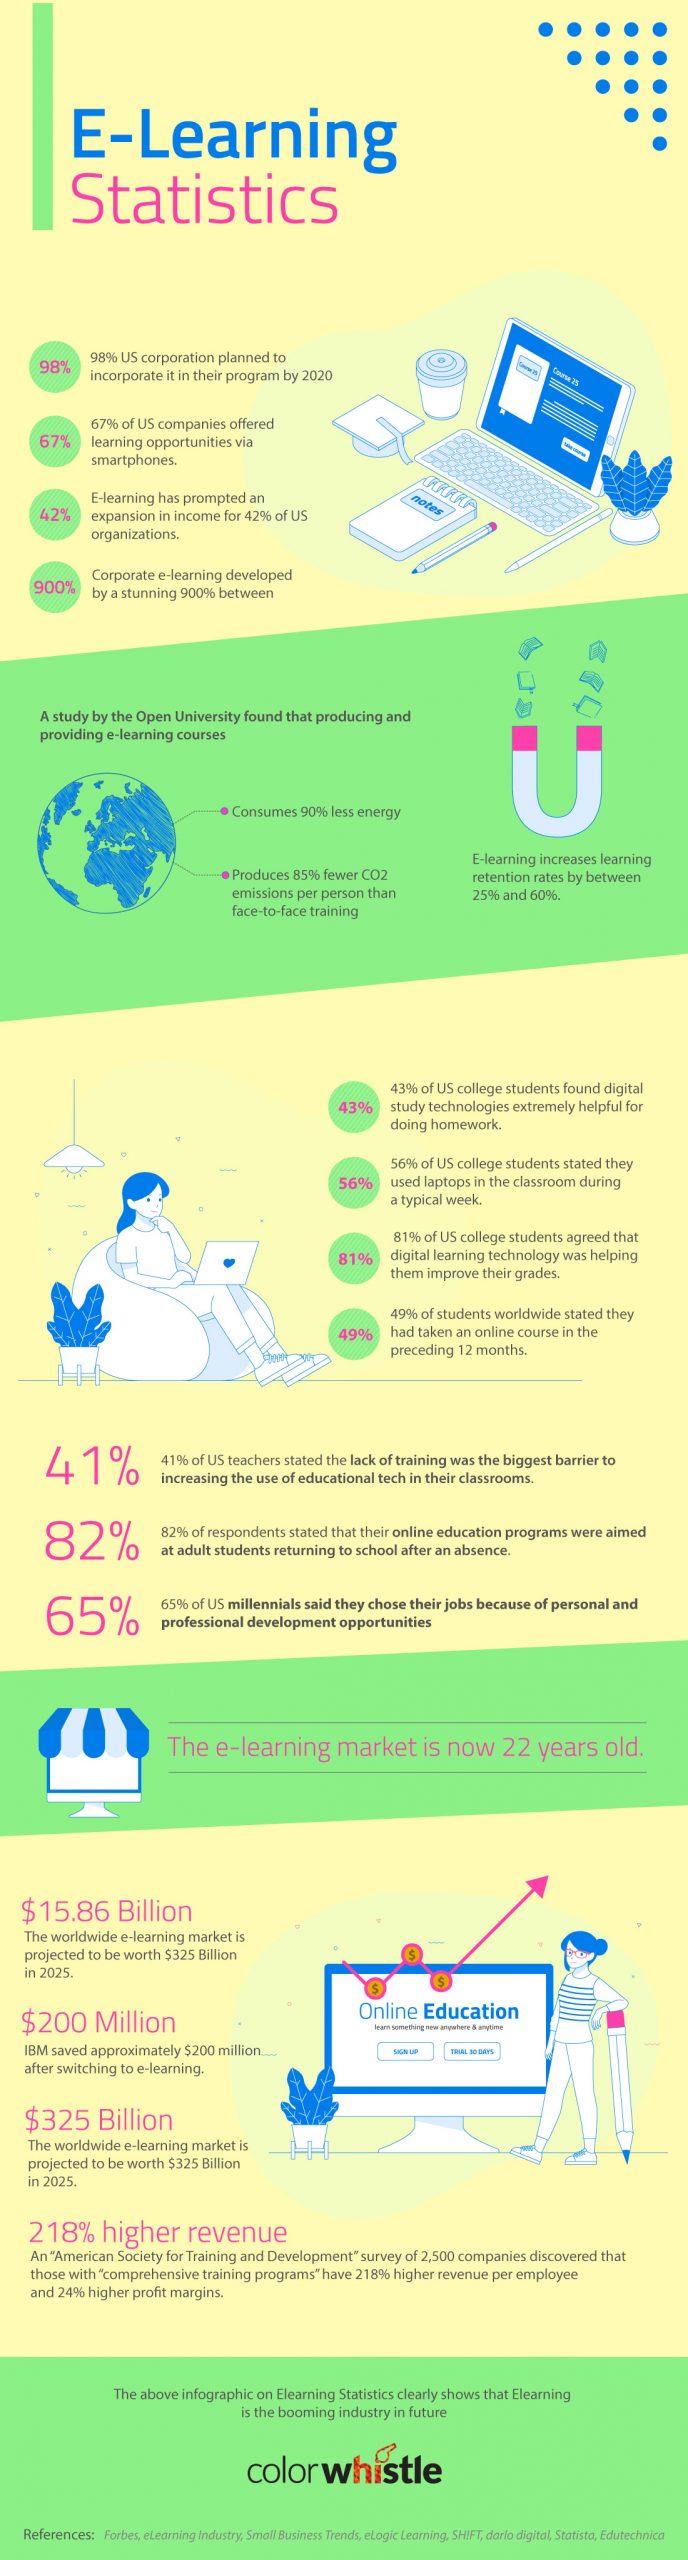 e-learning-statistics-infographic